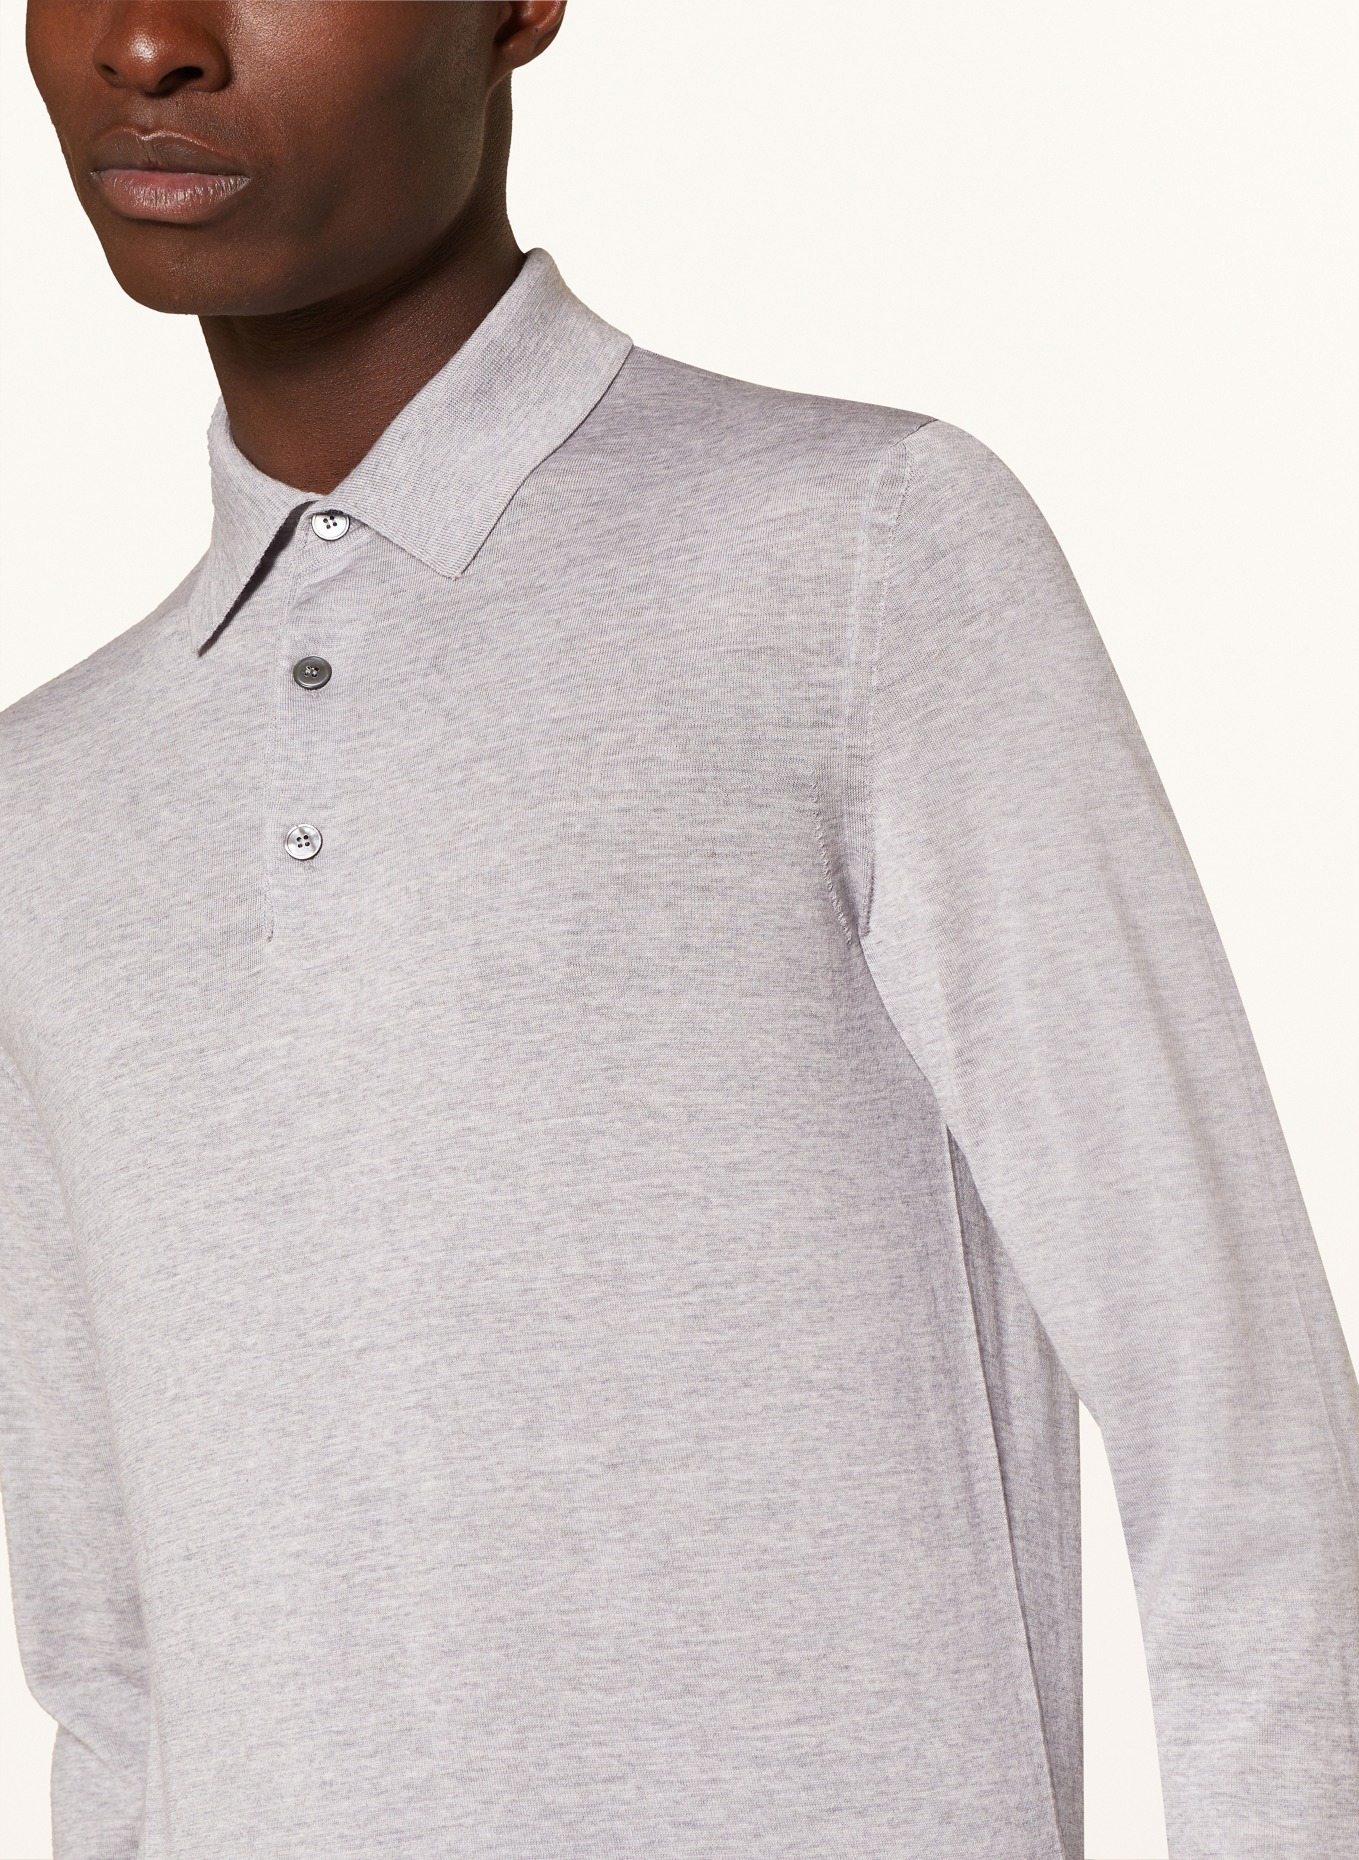 ZEGNA Sweater, Color: LIGHT GRAY (Image 4)